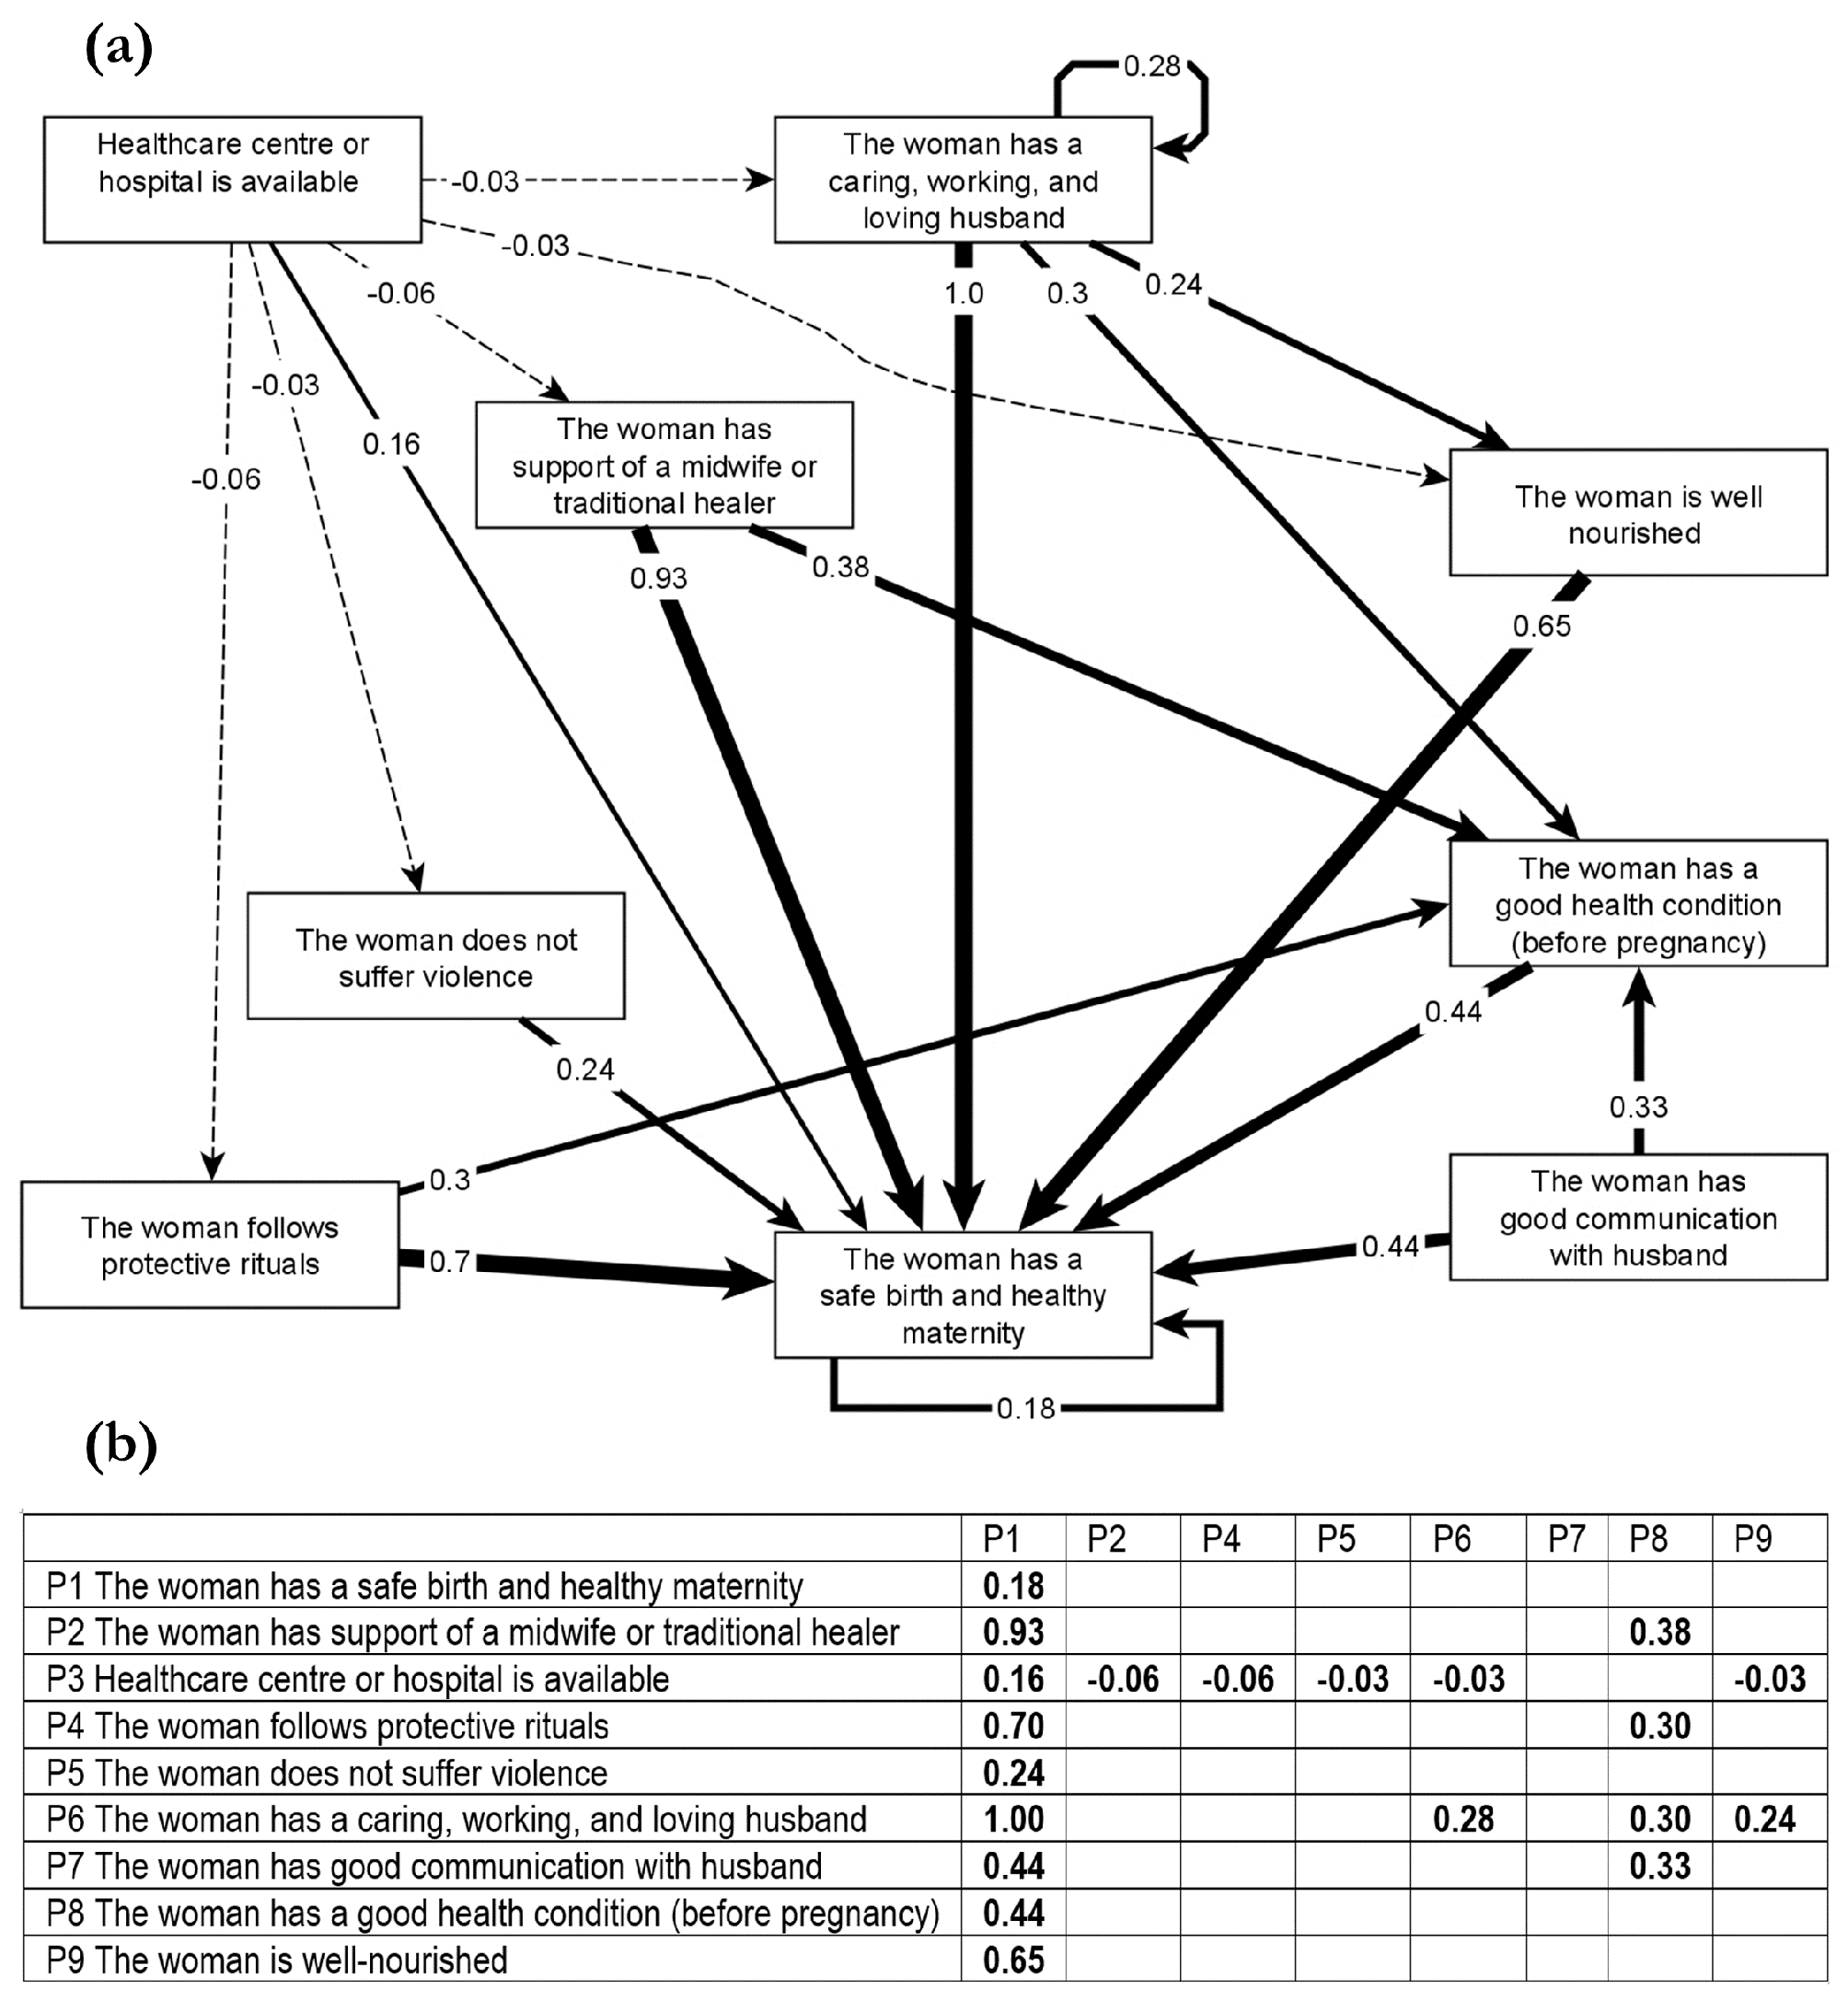 Fuzzy cognitive mapping in participatory research and decision making: a practice review